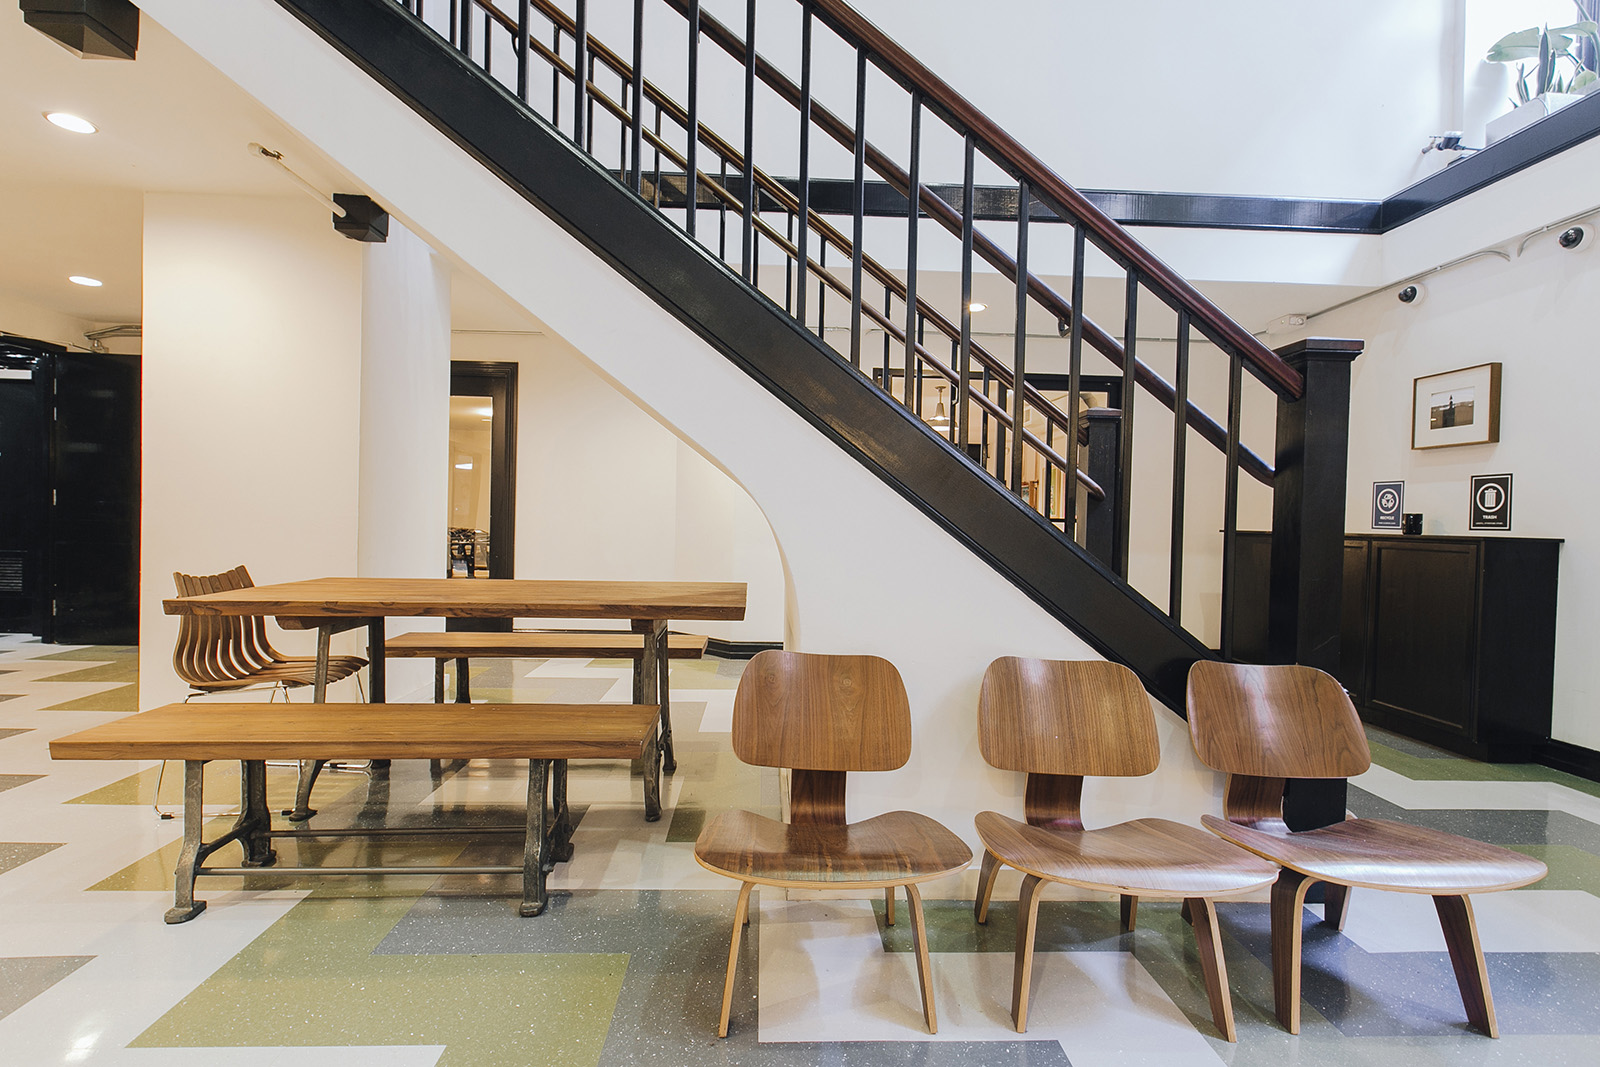 A Look Inside WeWork’s SoMa Coworking Space